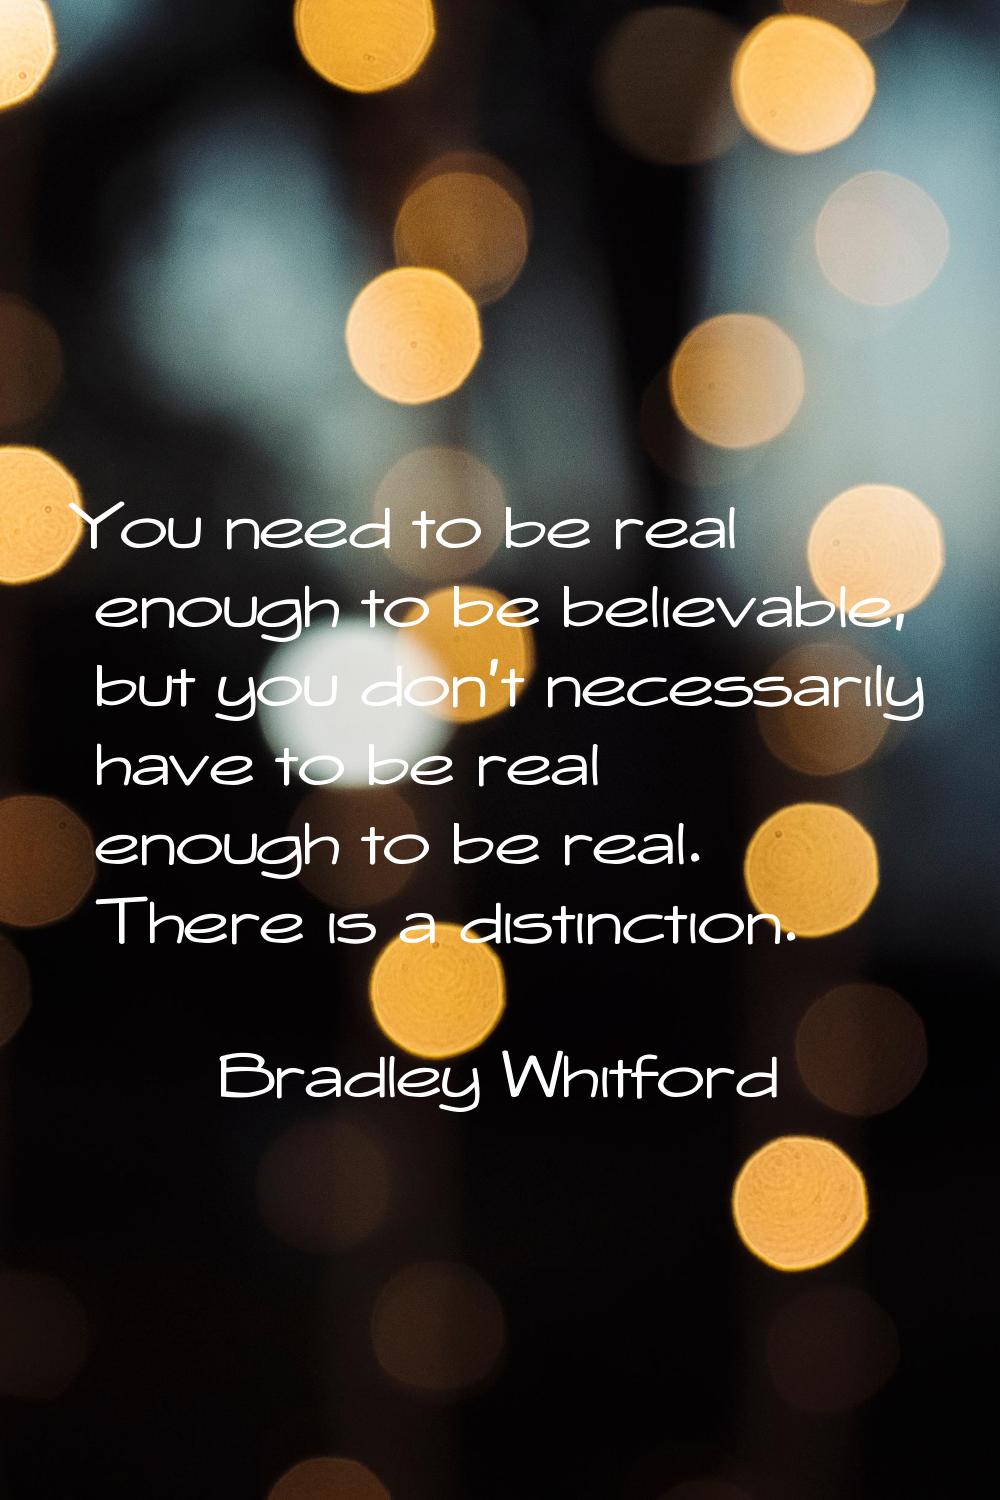 You need to be real enough to be believable, but you don't necessarily have to be real enough to be